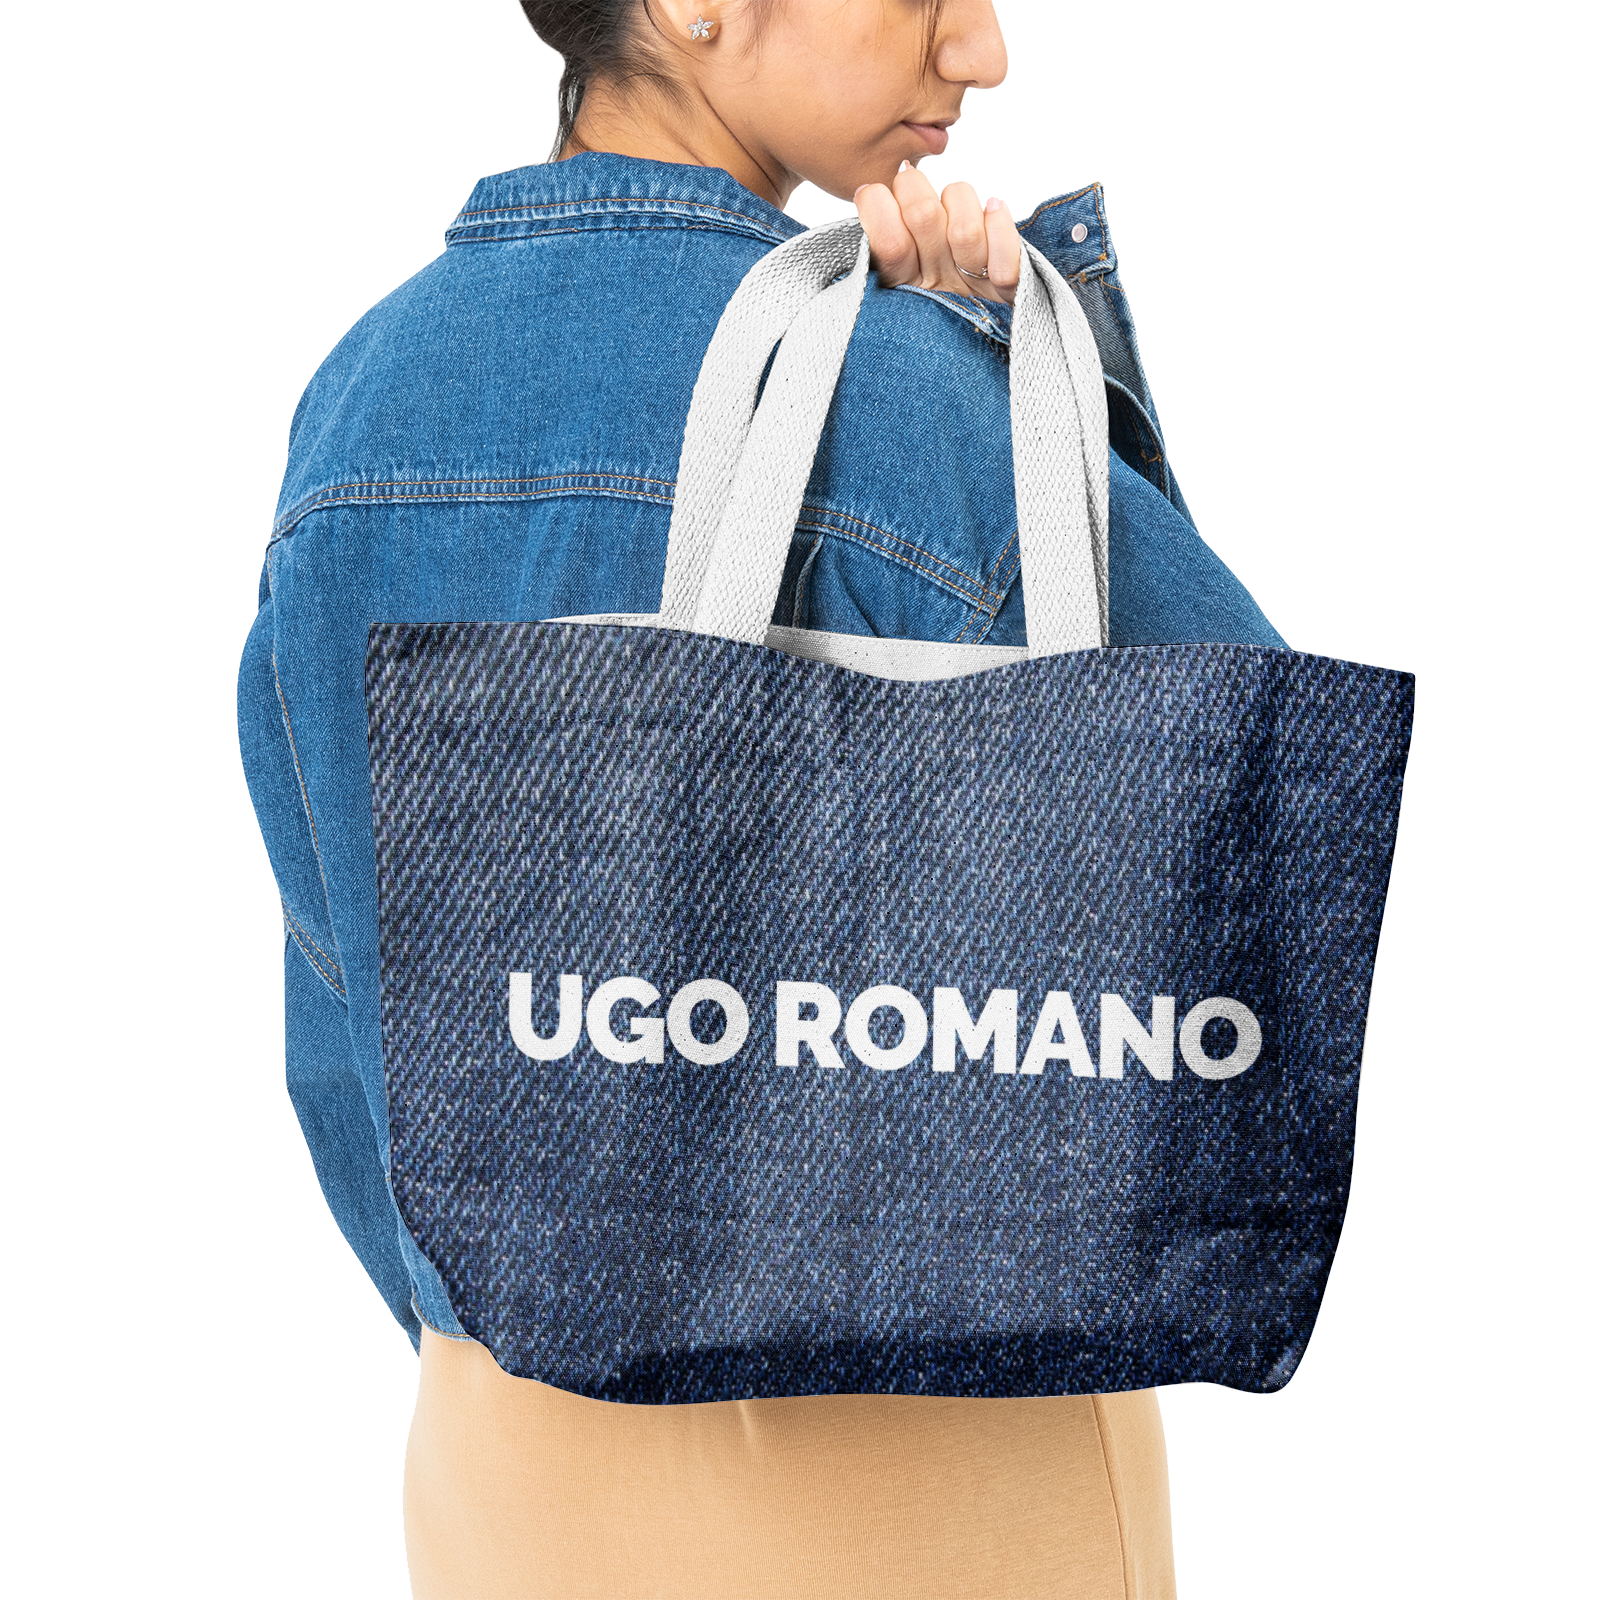 Heavy Duty and Strong Natural Cotton Canvas Tote Bag - UGO ROMANO URTB036